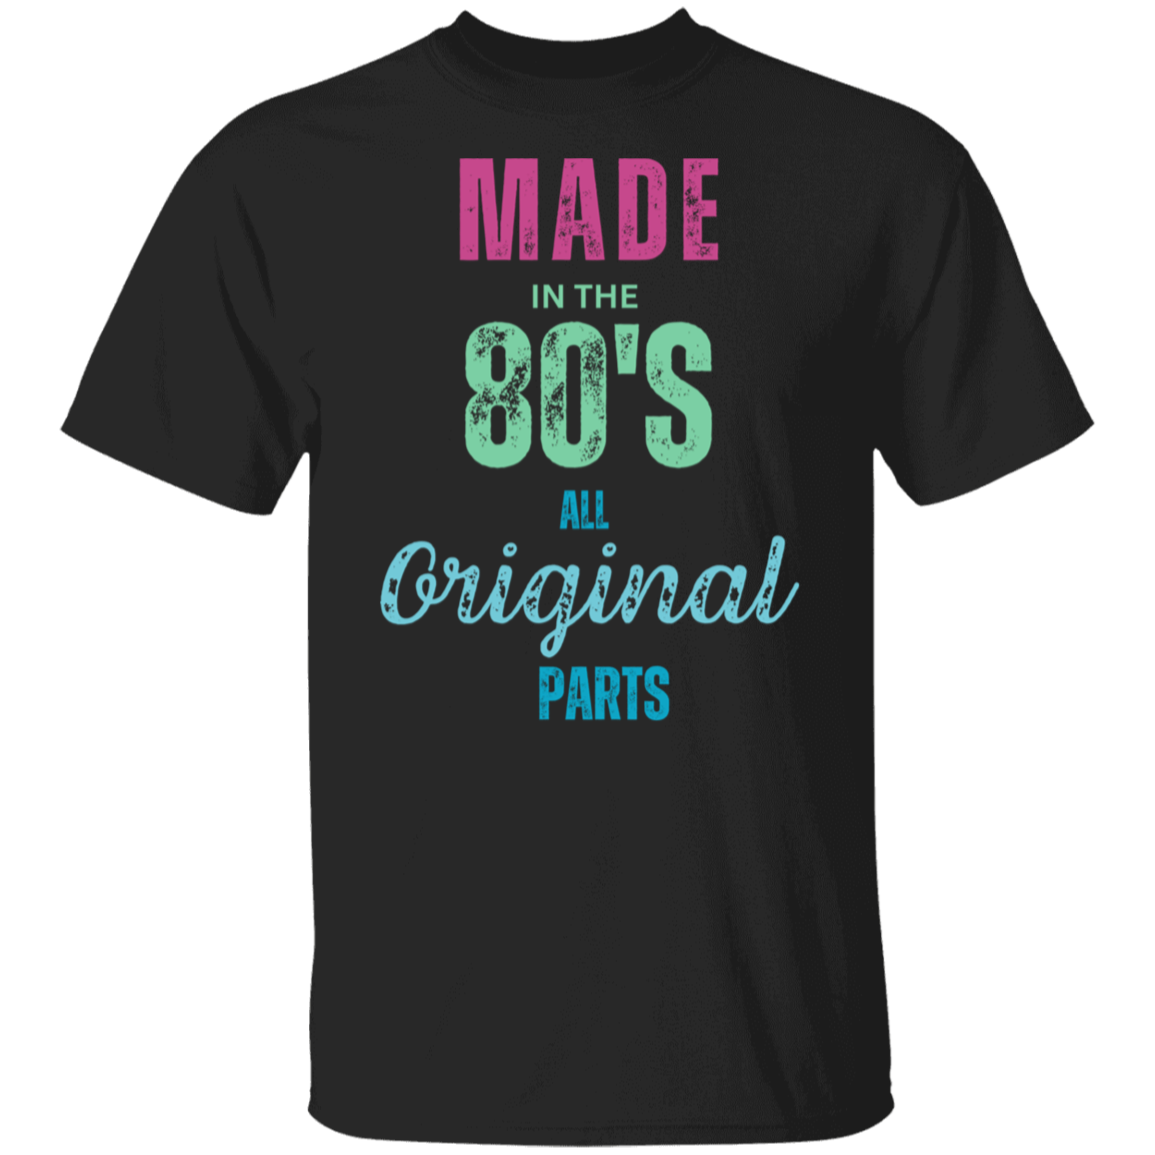 MADE IN THE 80'S 5.3 oz. T-Shirt